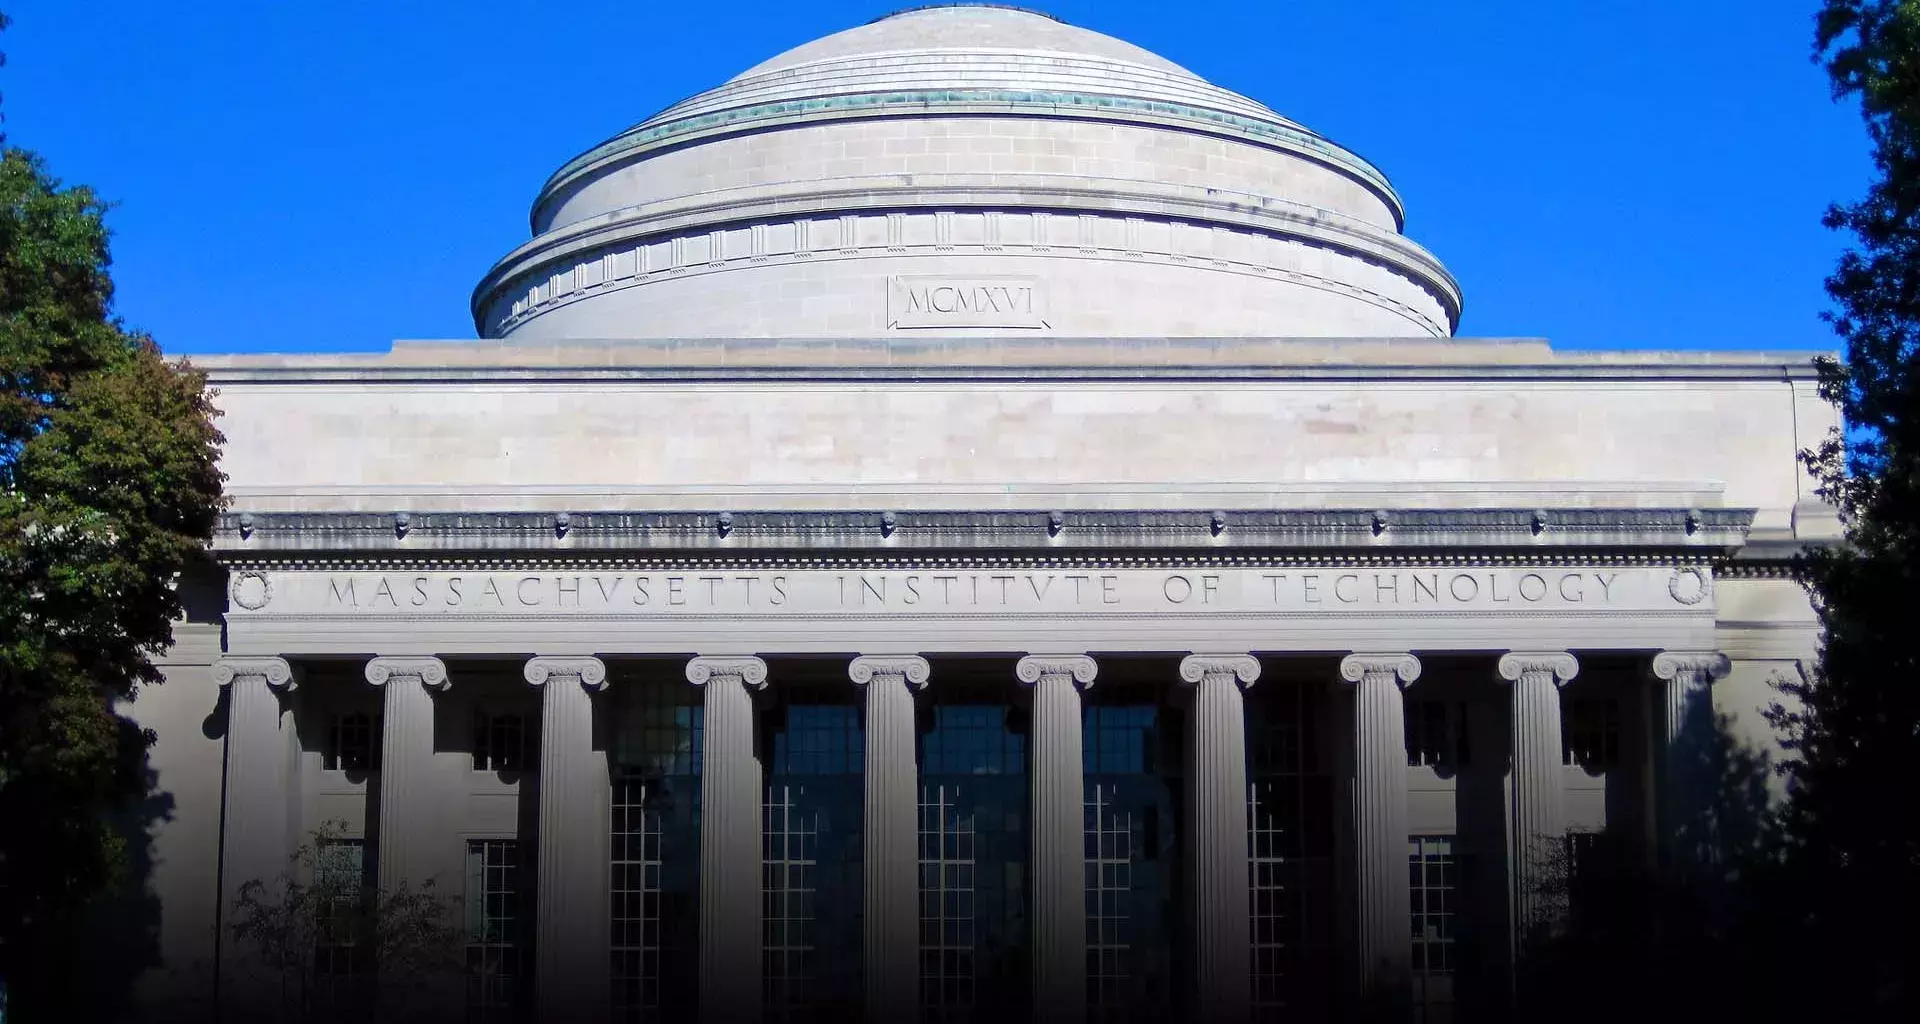 Tec graduates’ research is recognized by MIT